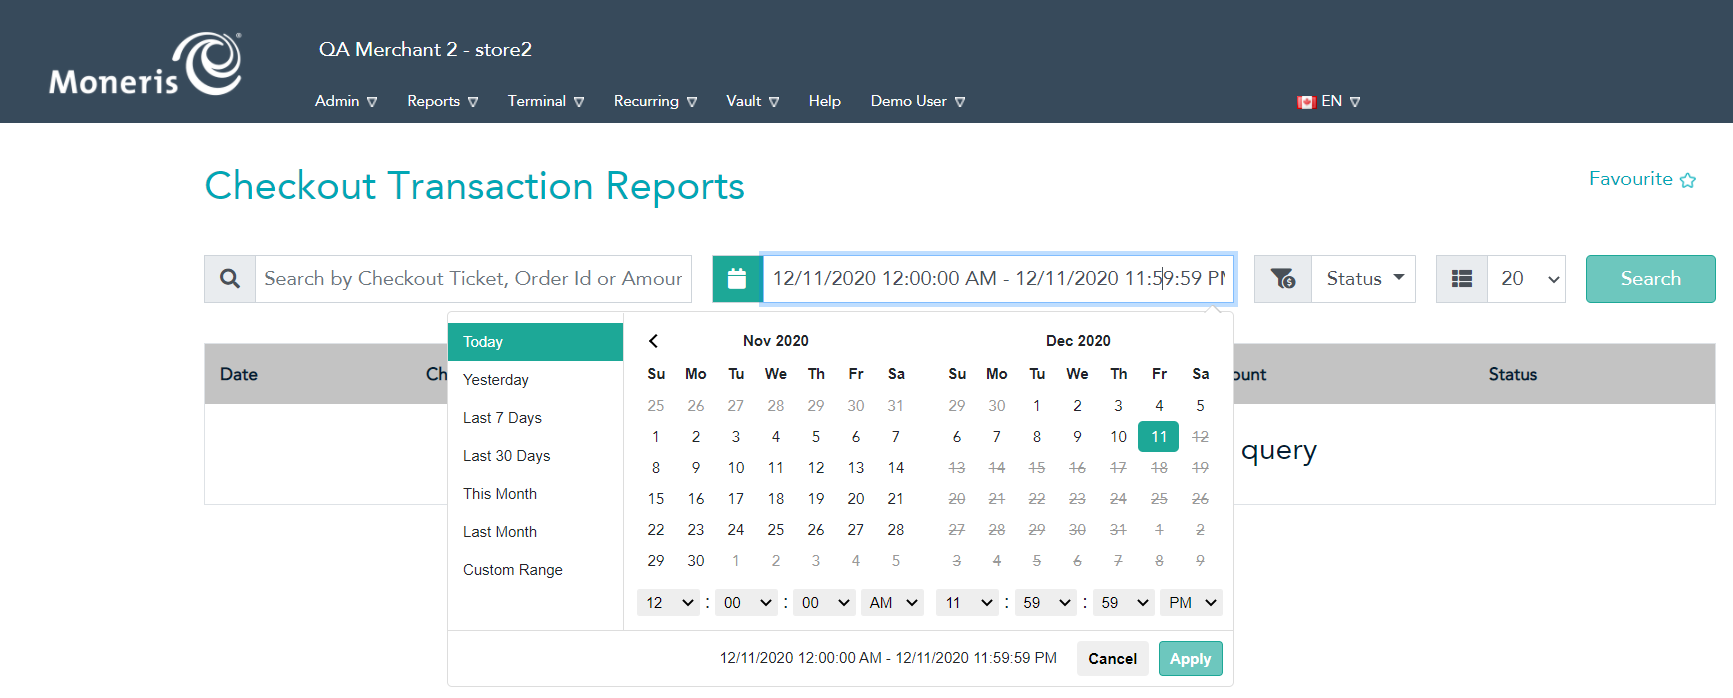 Use the calendar feature in the Custom Range to enter a date range for the report.